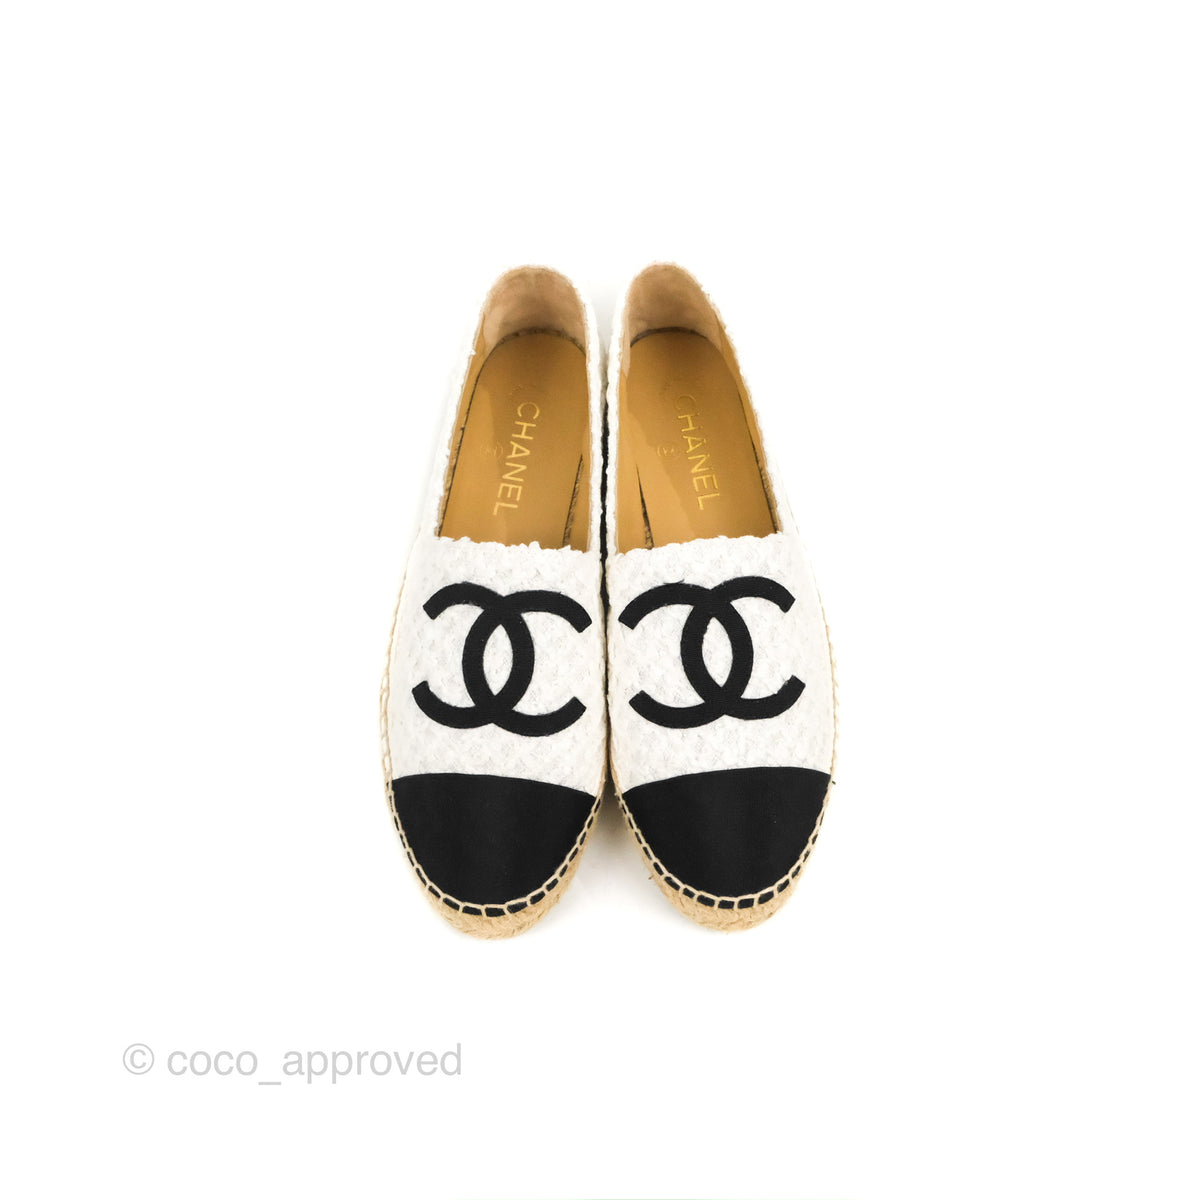 Chanel Espadrille Navy Black Leather Size 39 – Coco Approved Studio